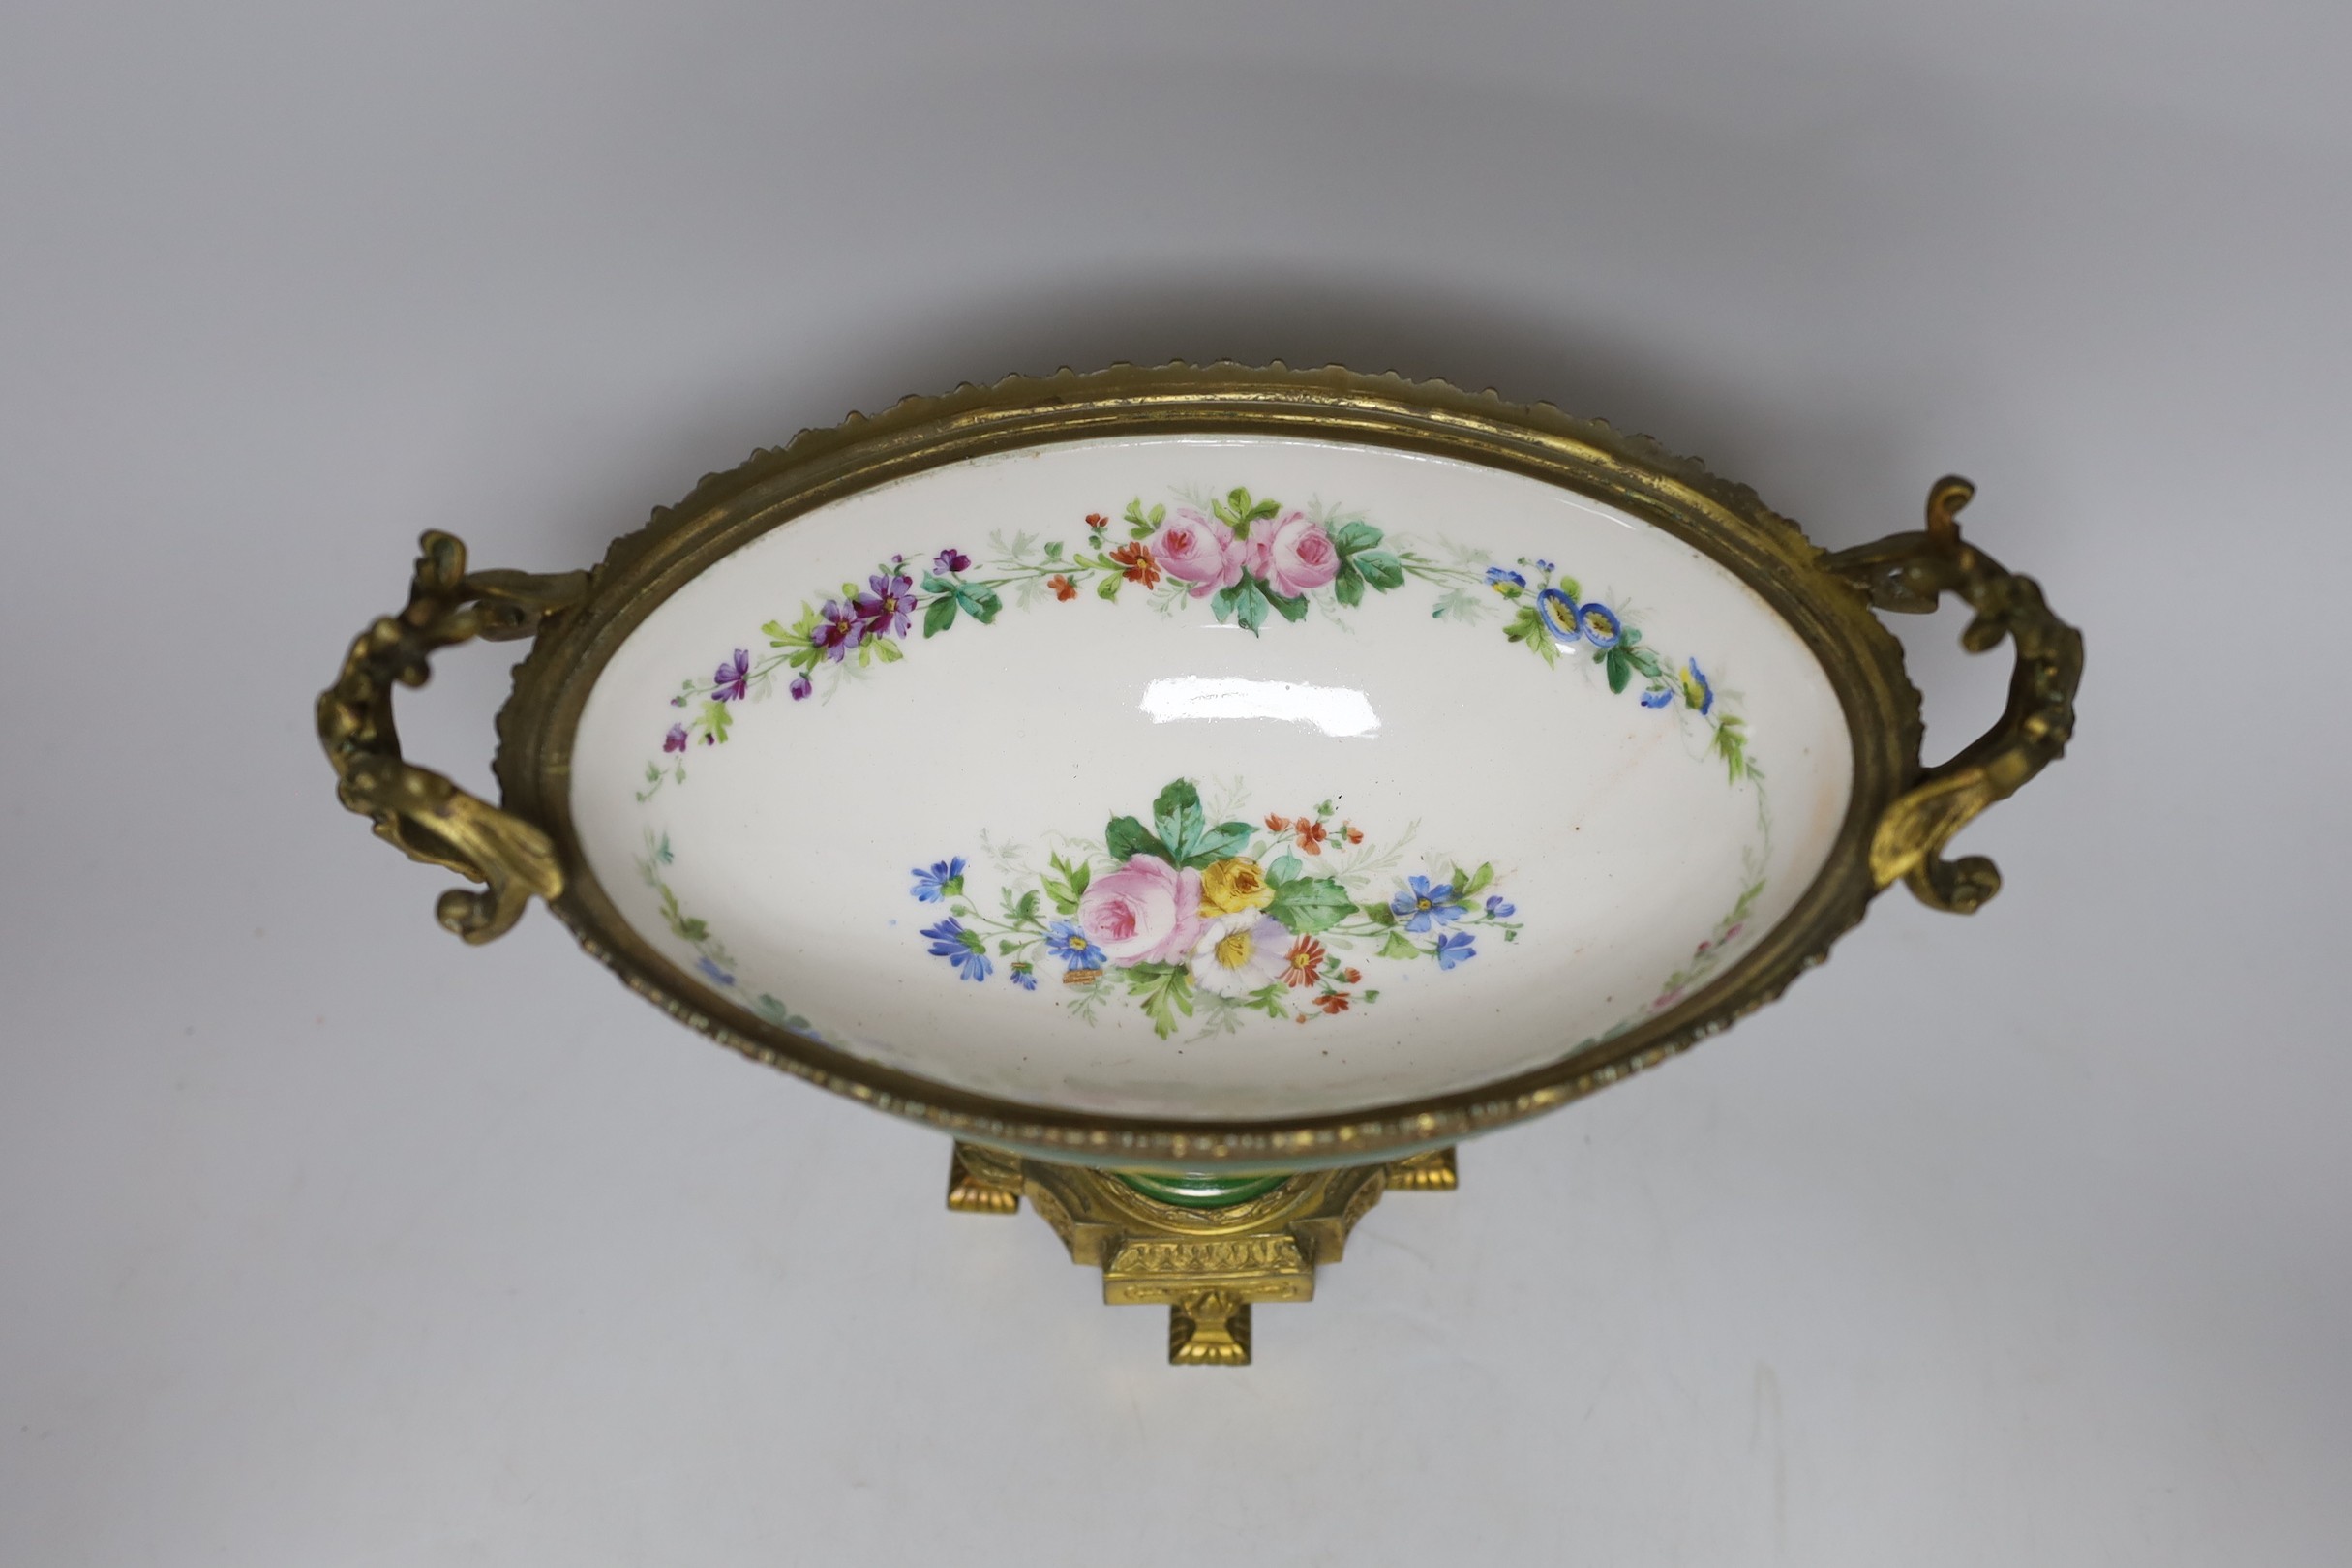 A Sevres-style ormolu mounted centrepiece. 31cm wide